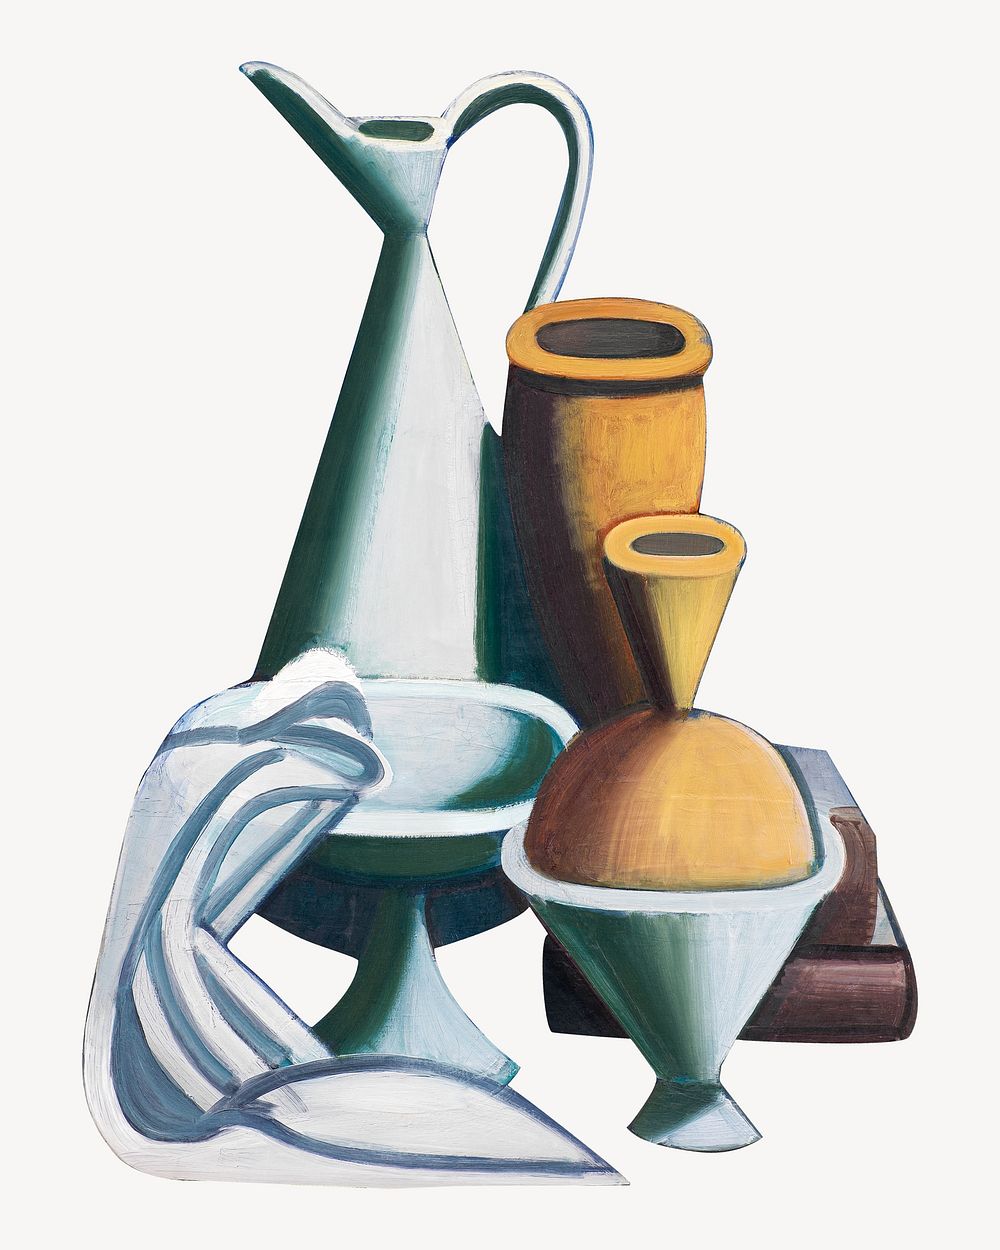 Watering can, towel and jars, vintage illustration by Vilhelm Lundstrom. Remixed by rawpixel.